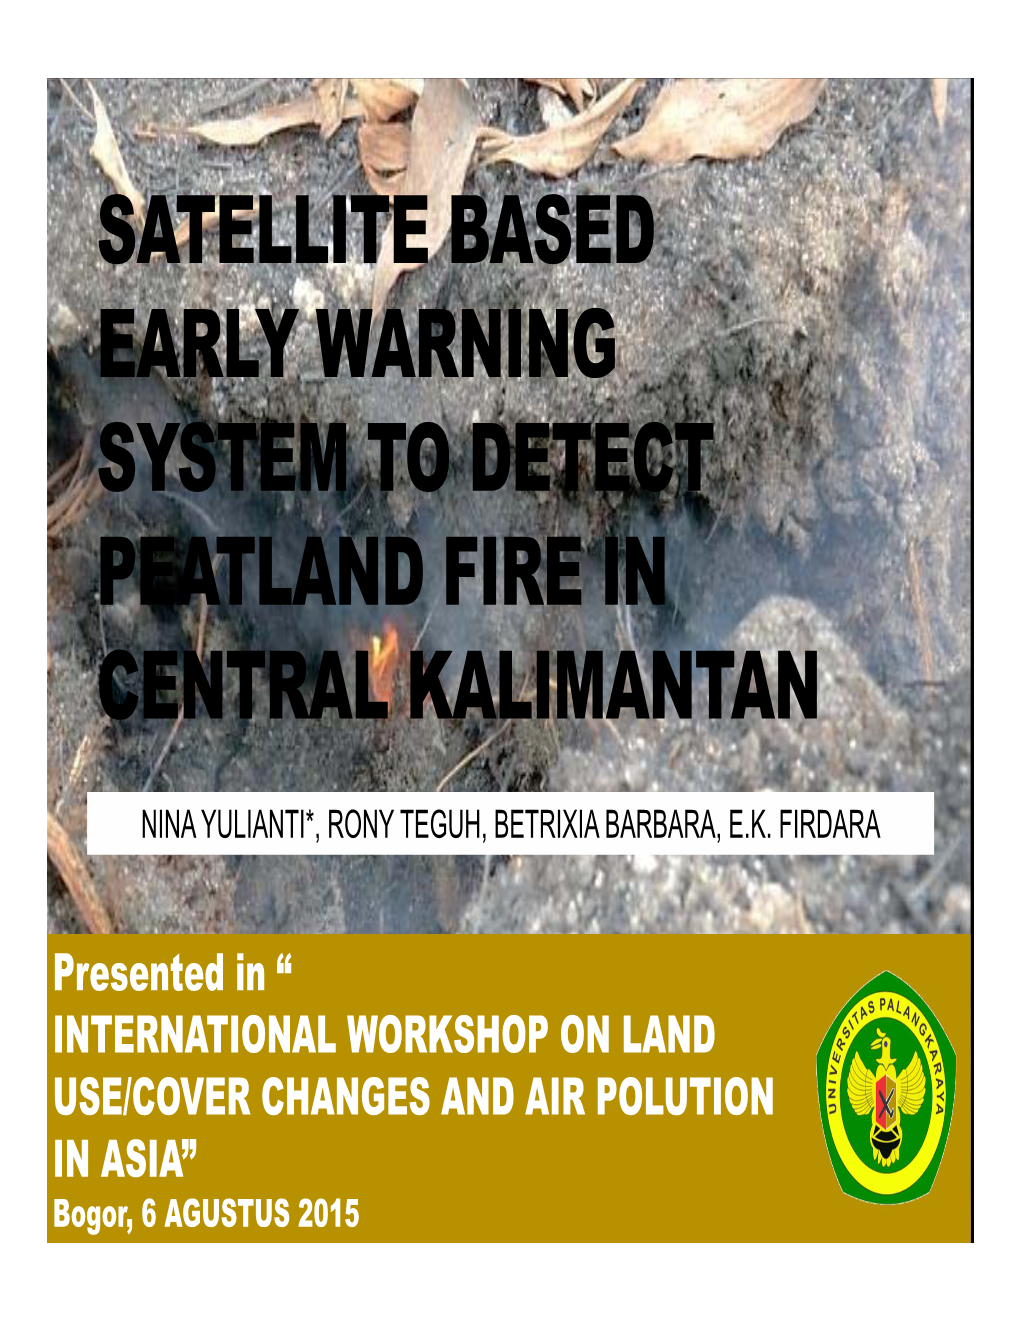 Satellite Based Early Warning System to Detect Peatland Fire in Central Kalimantan